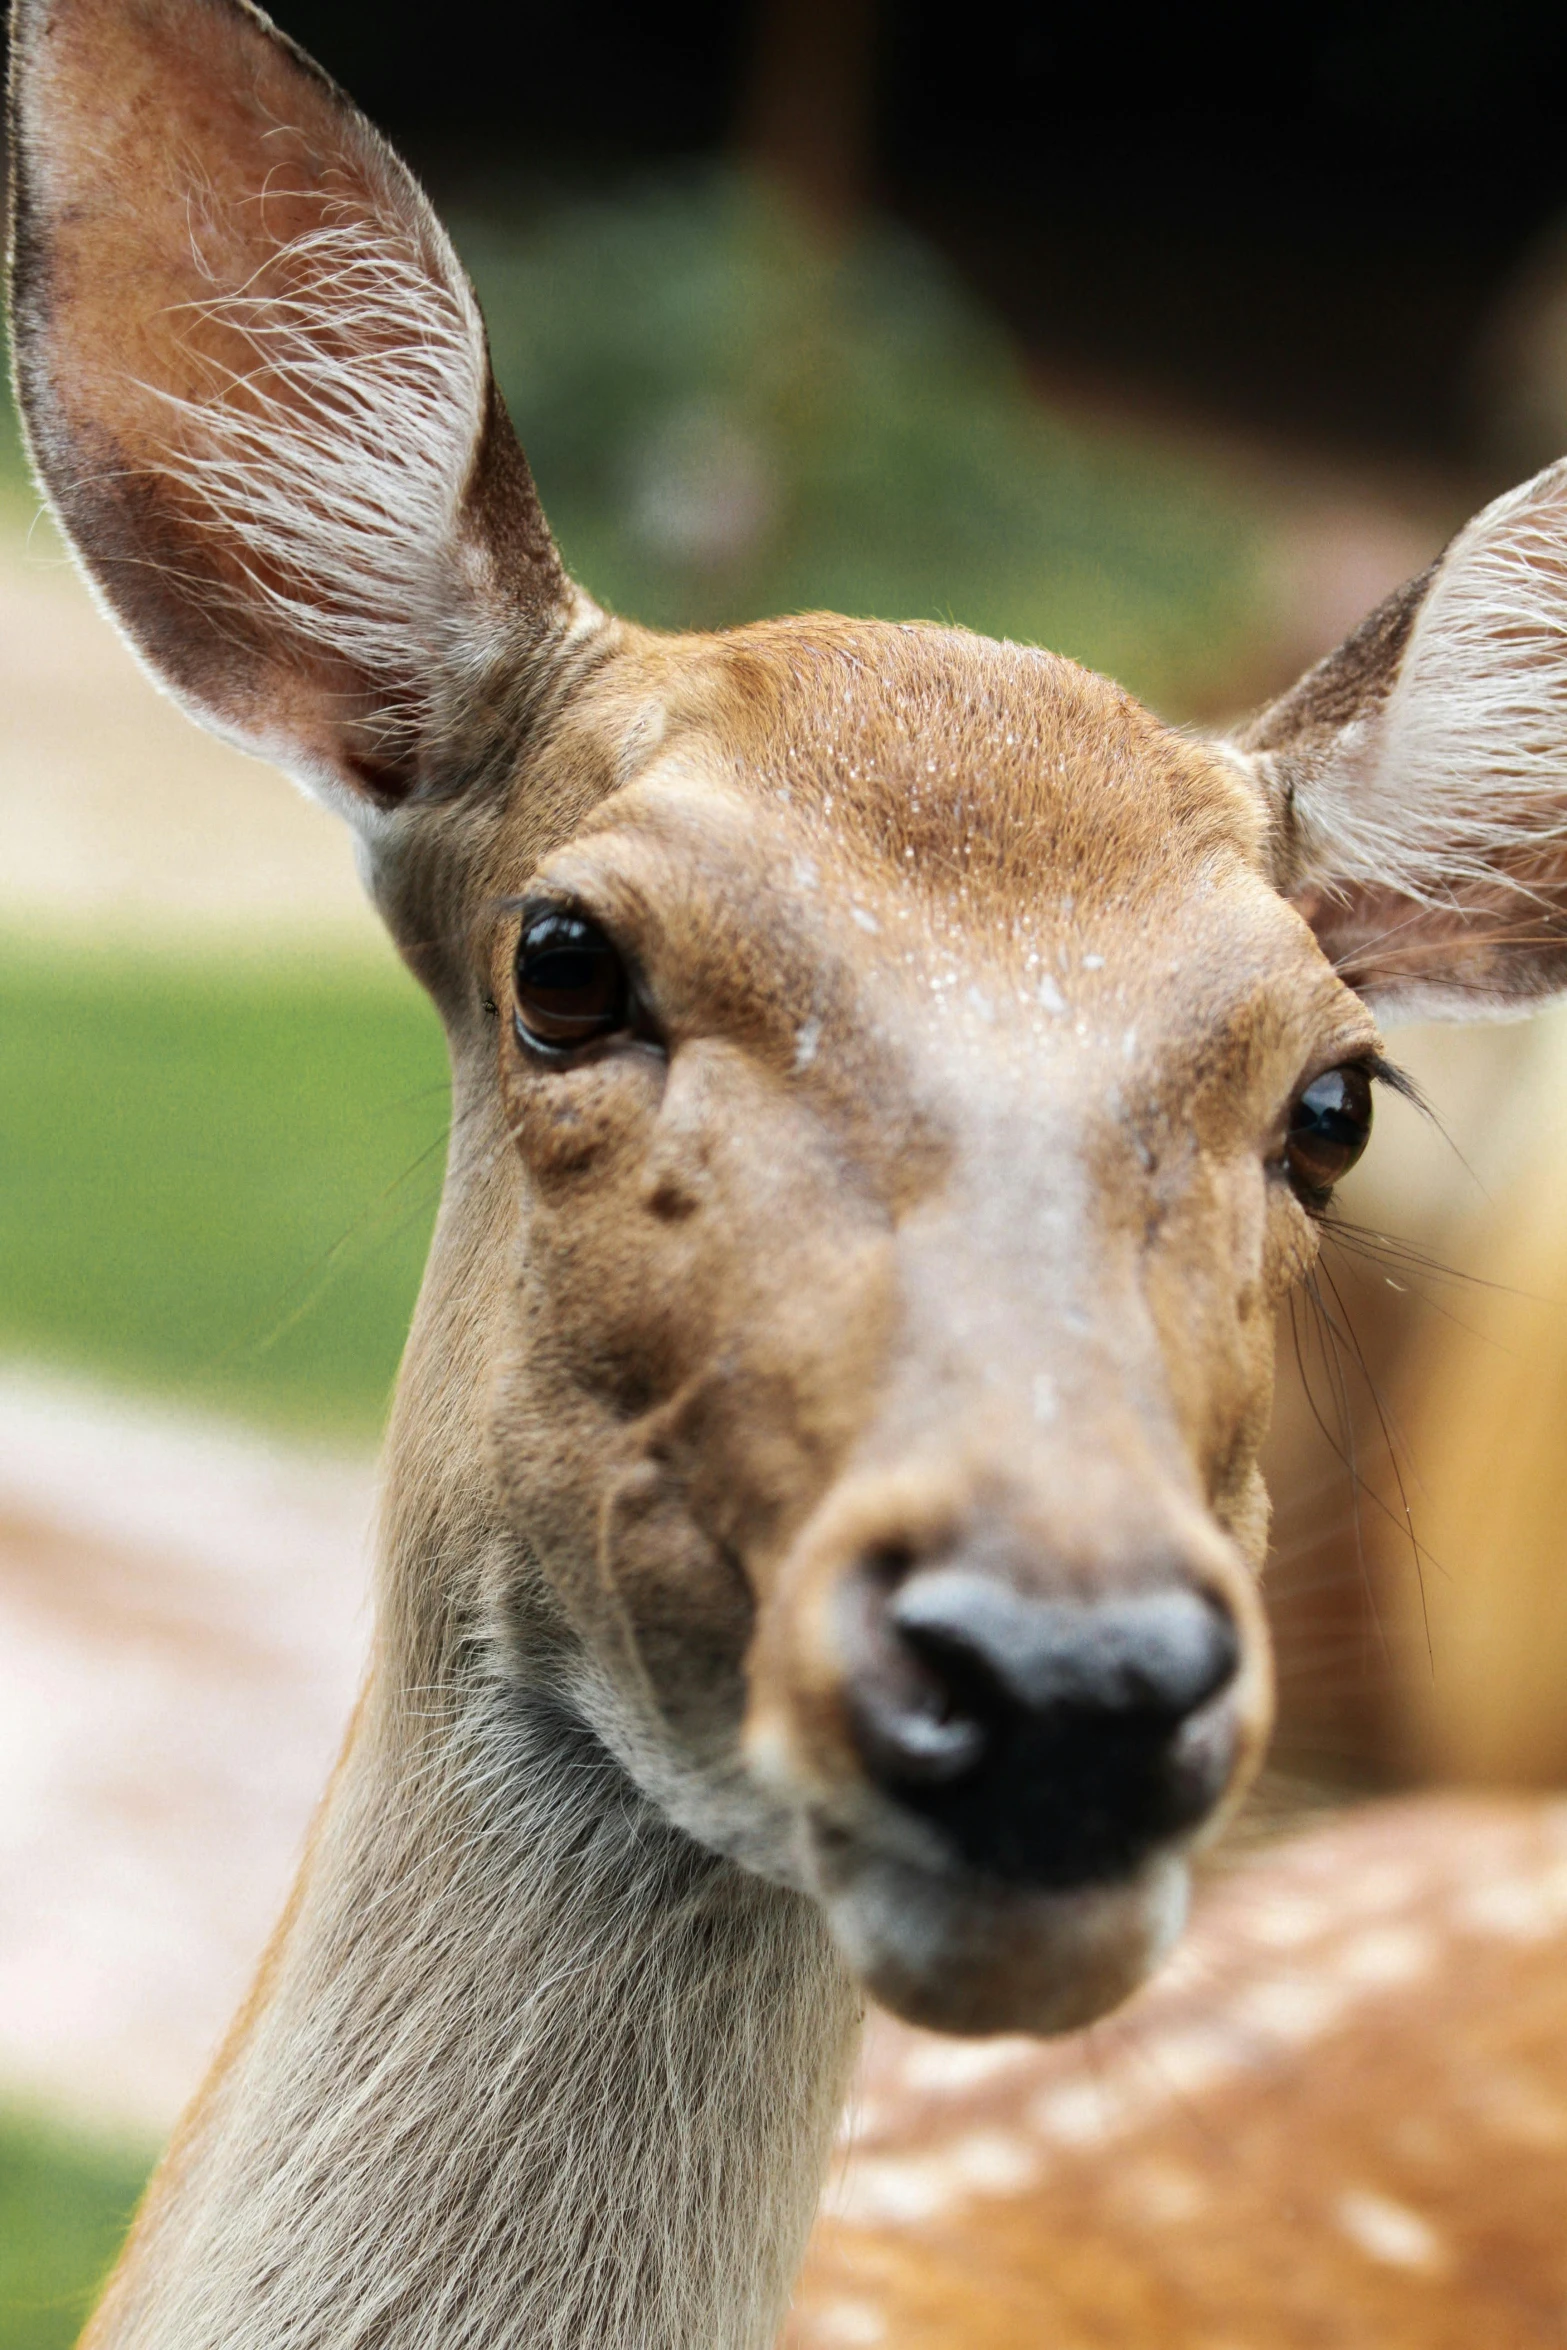 a close up po of a deer's face and ears